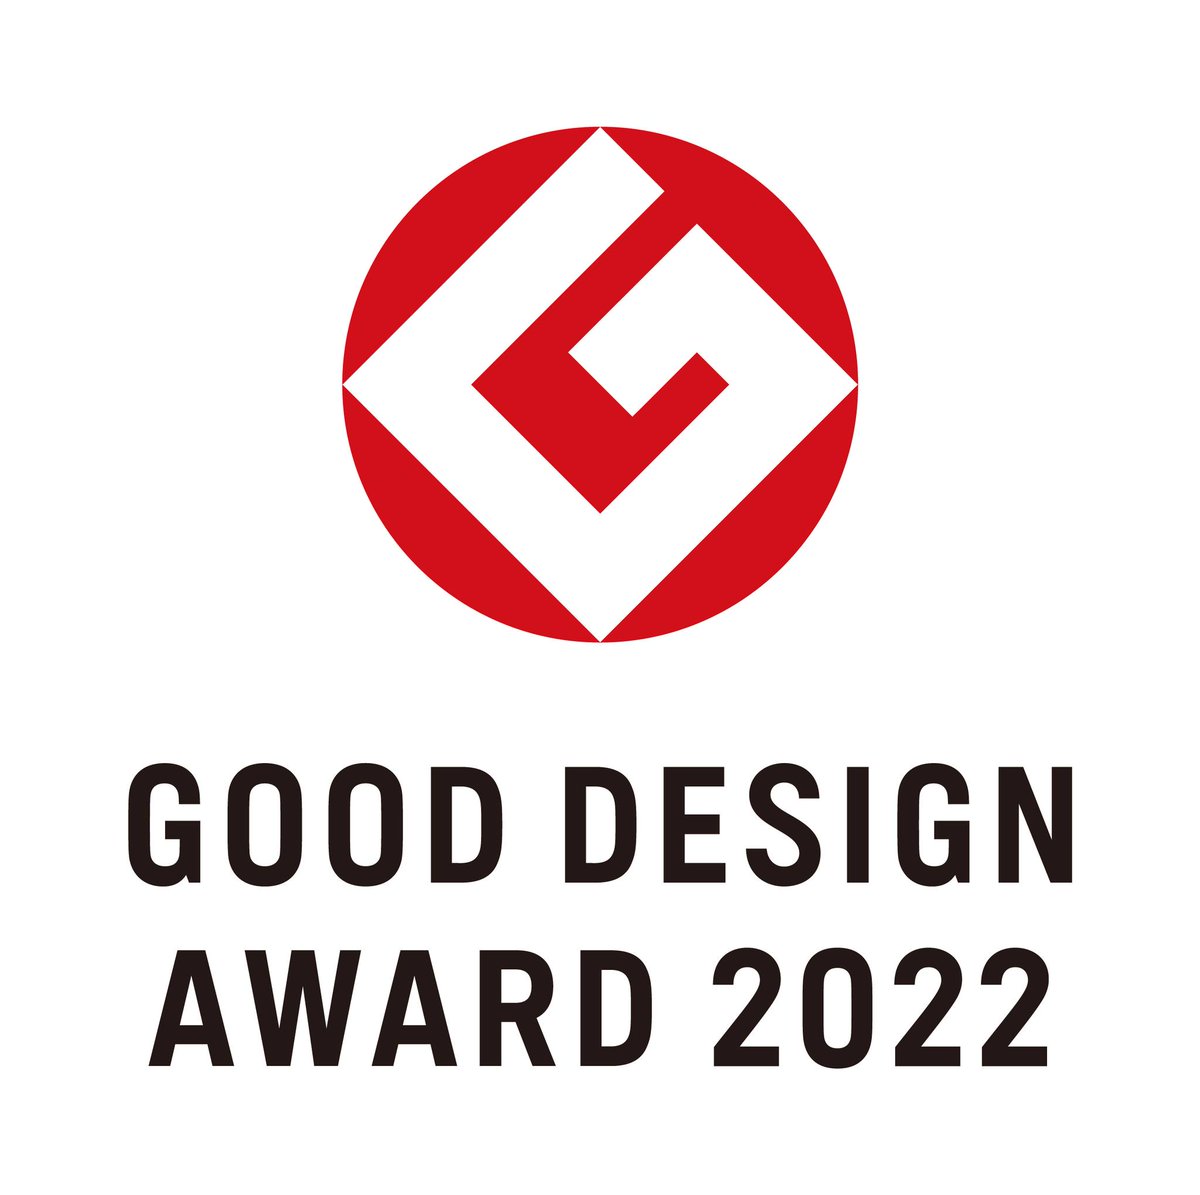 It's my great pleasure that #miwoapp receive the Good Design Award 2022 in Systems and Services category from Japan Institute of Design Promotion. Thank you so much to my collaborators @KitamotoAsanobu @rois_codh @mikb0b @RinnaTheCat